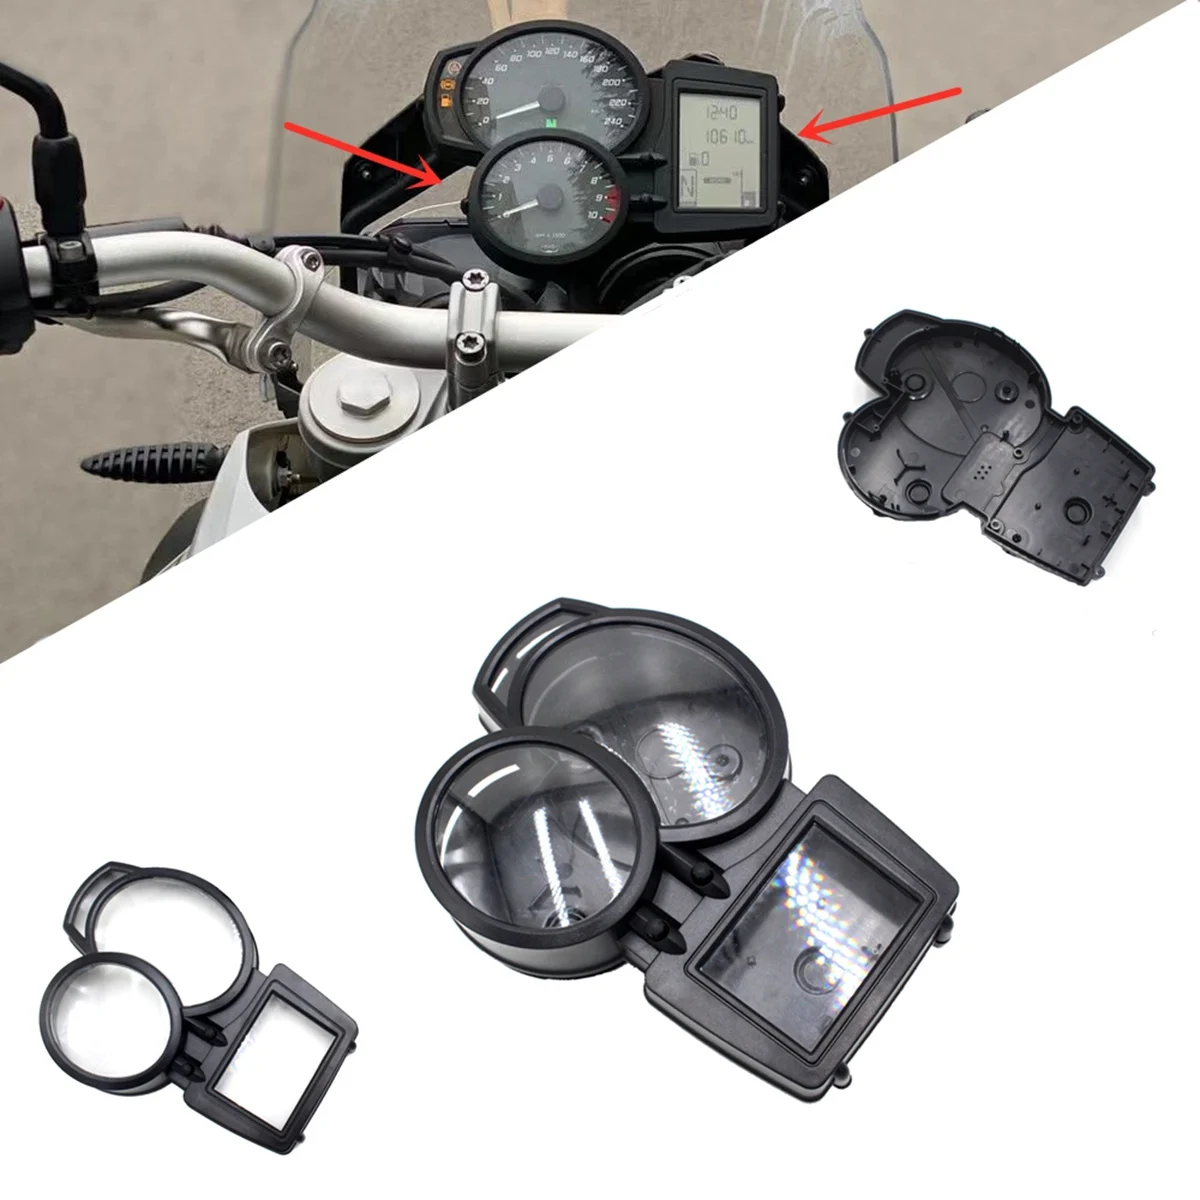 

Instrument Speedometer Cover Gauges Platel Meter Odometer Tachometer Shell for -BMW F650G F800GS F800R F800 GS F800ST